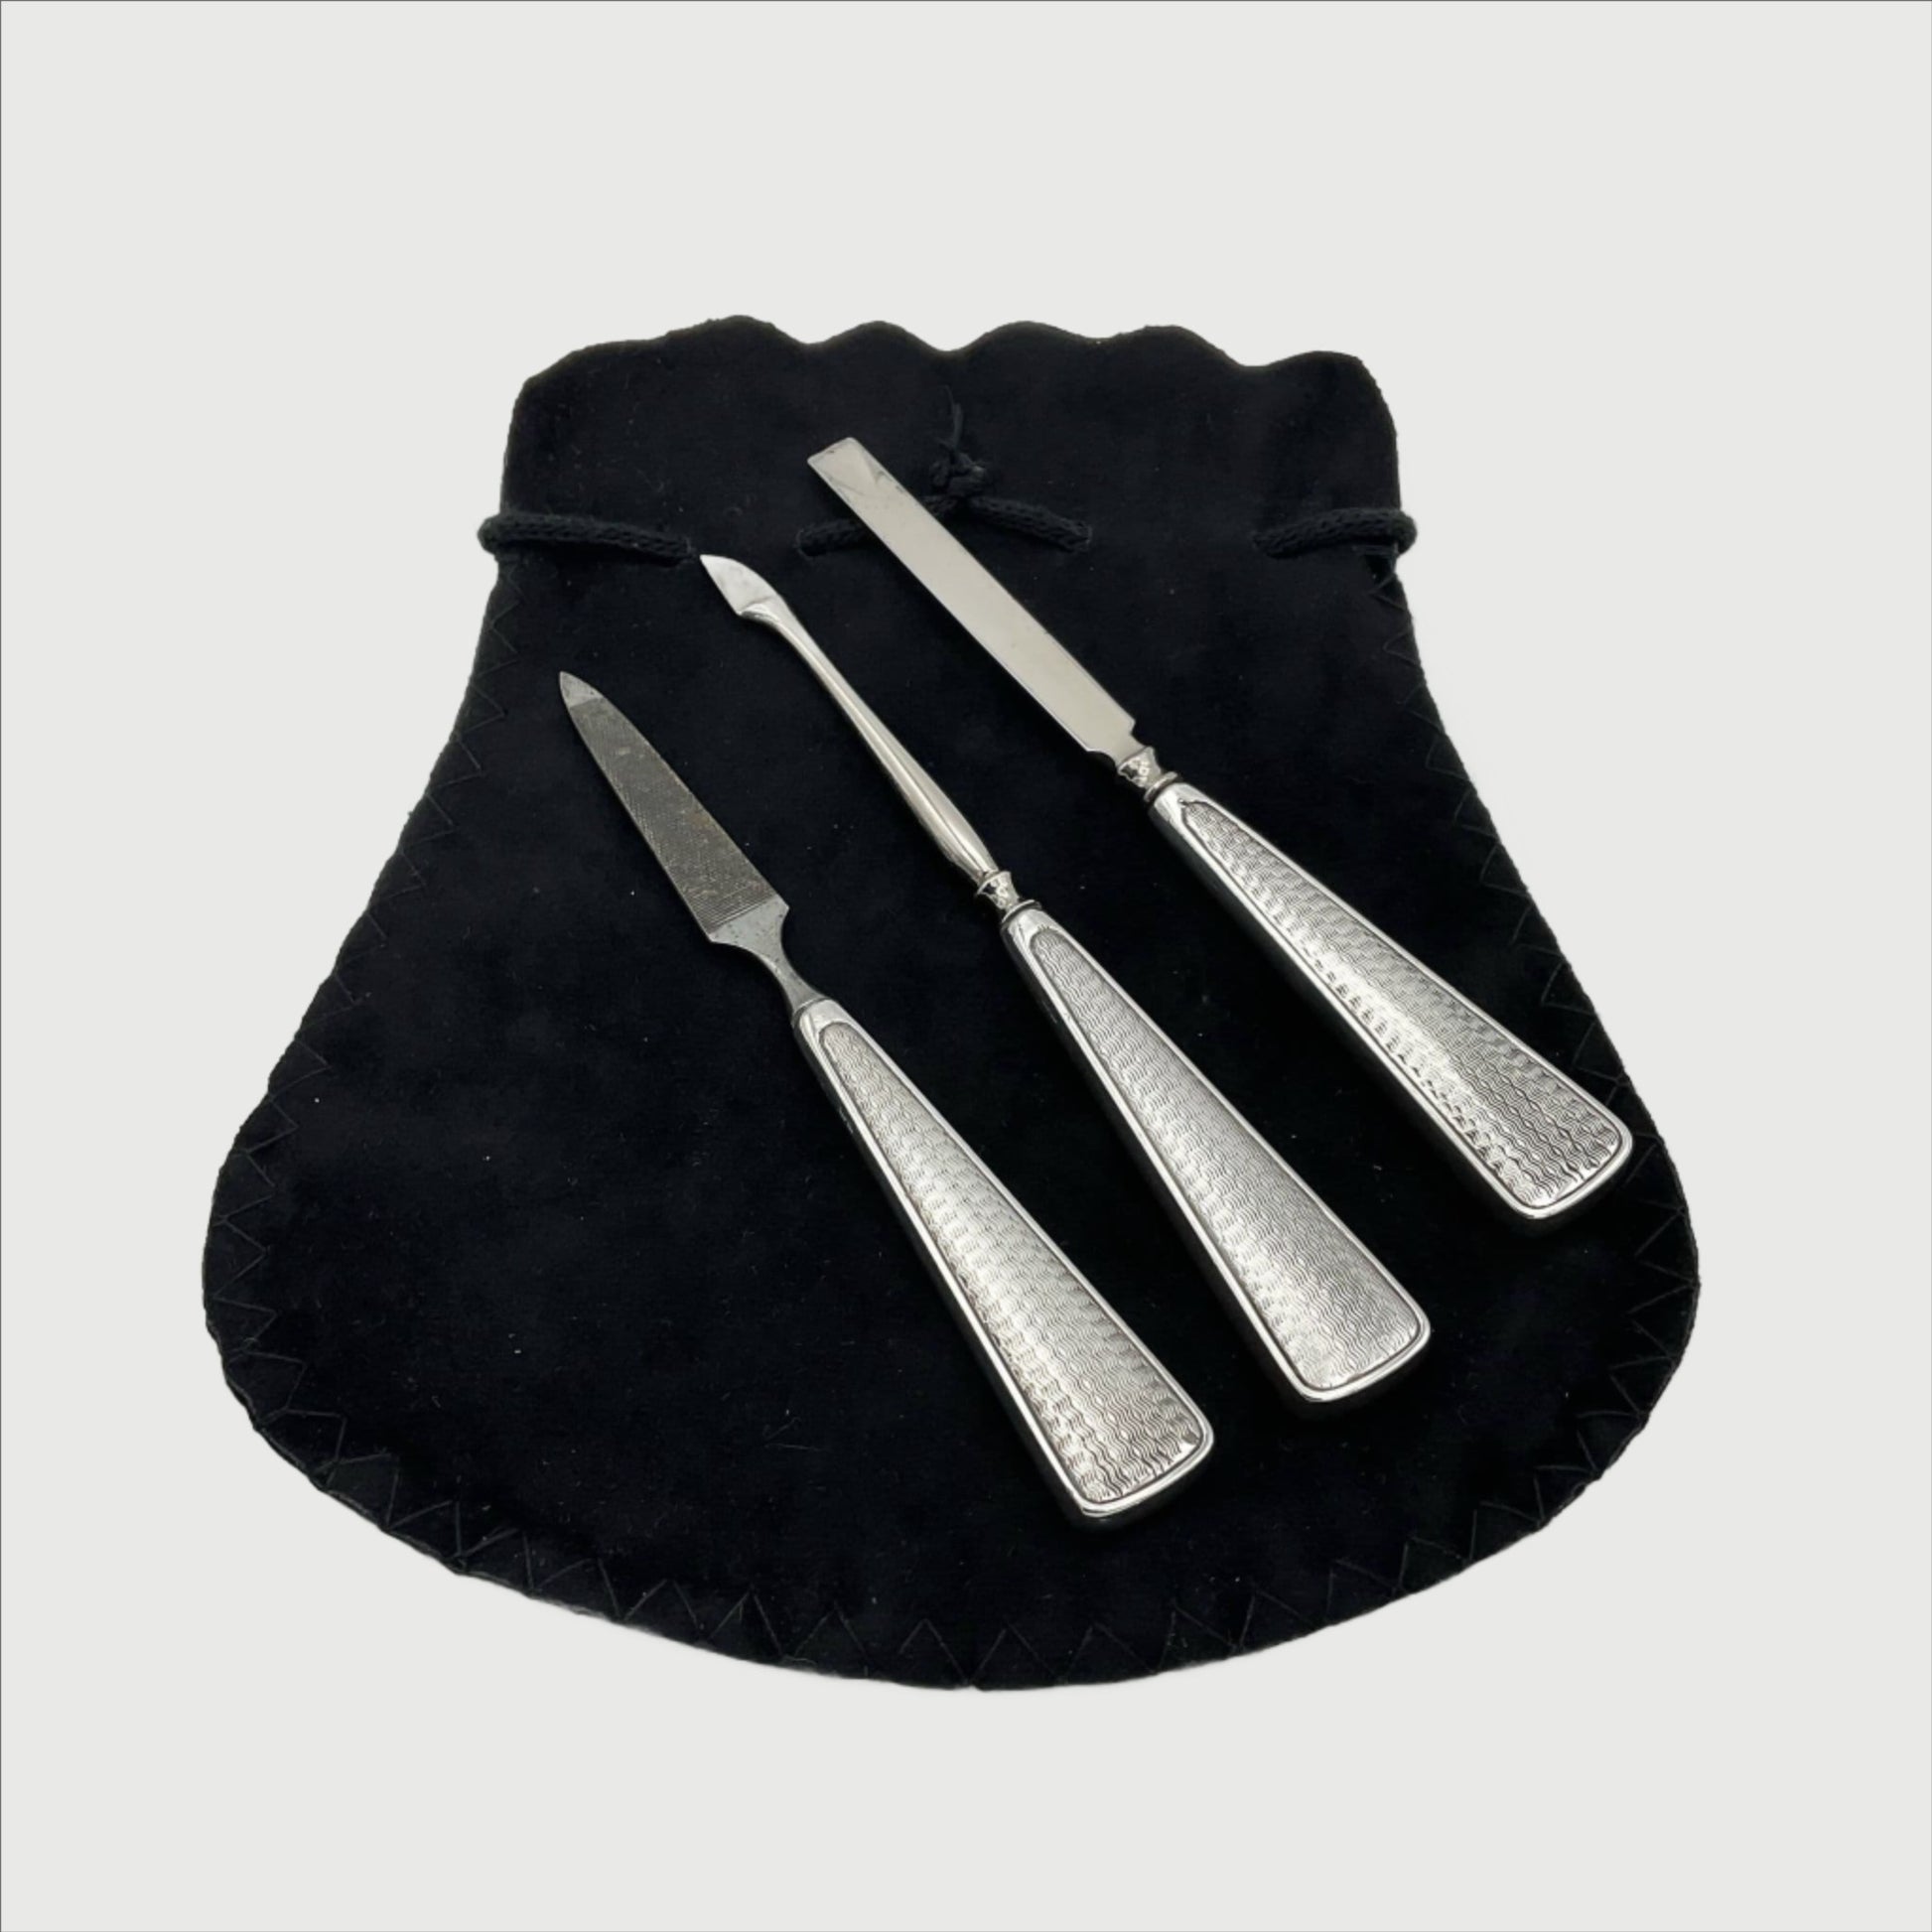 Three manicure tools with wavy 1930s design on the silver handles. The tools are a nail file and two types of cuticle pushers on a black bag.